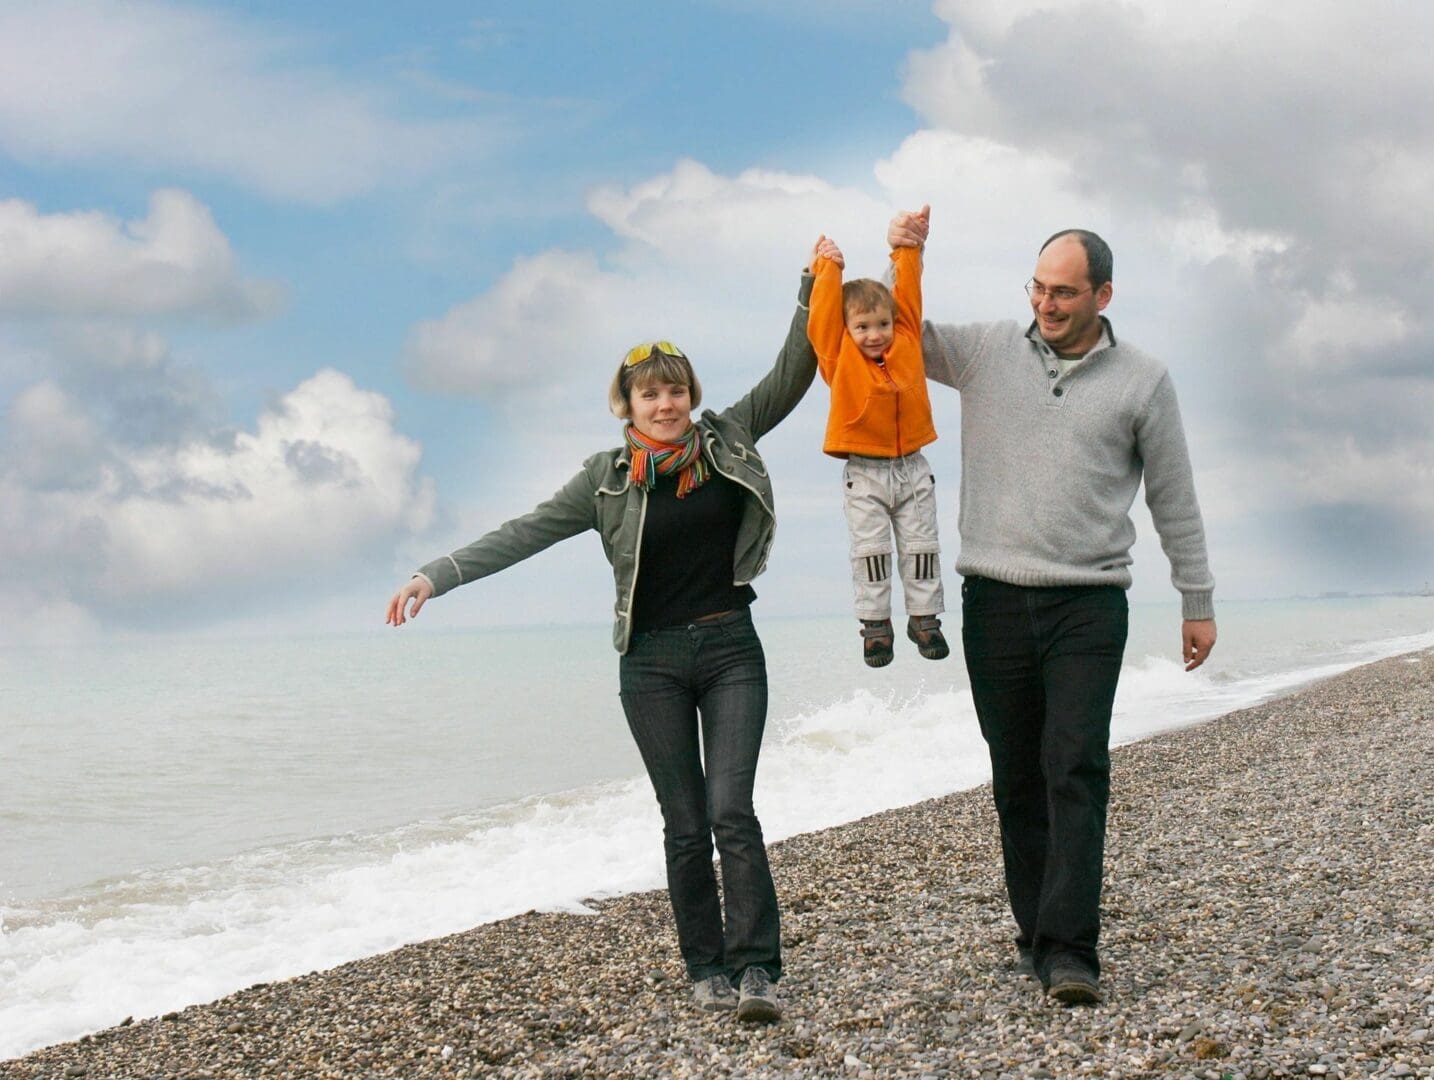 A man, woman and child walking on the beach.